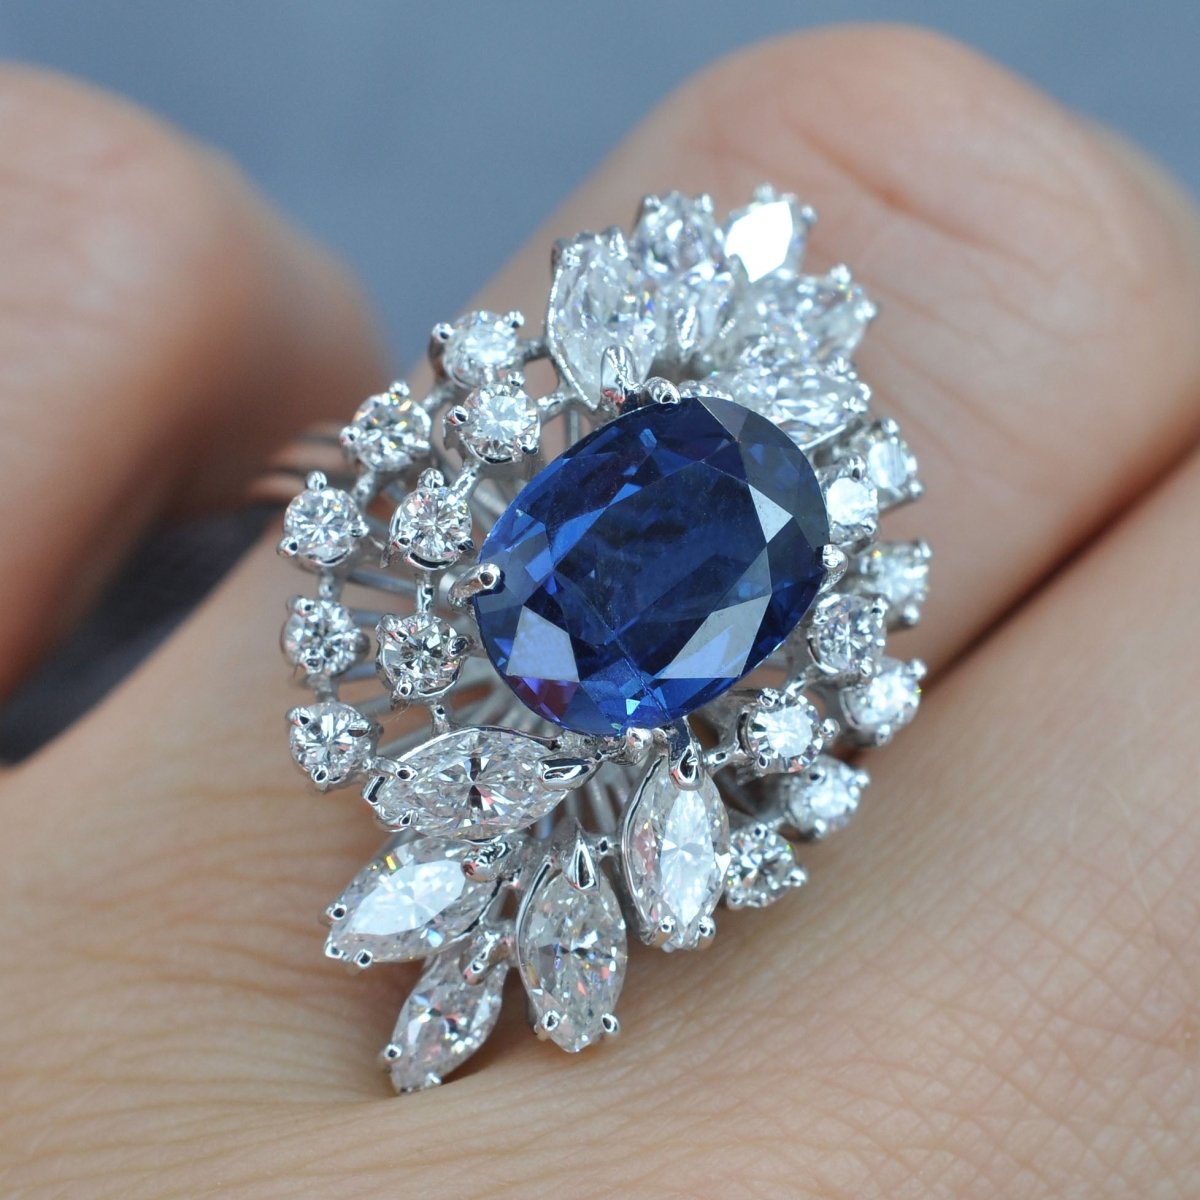 Certified 6.30CT Oval, Round, and Marquise Cut Diamond and Blue Sapphire Engagement Ring in 18KT White Gold - Primestyle.com